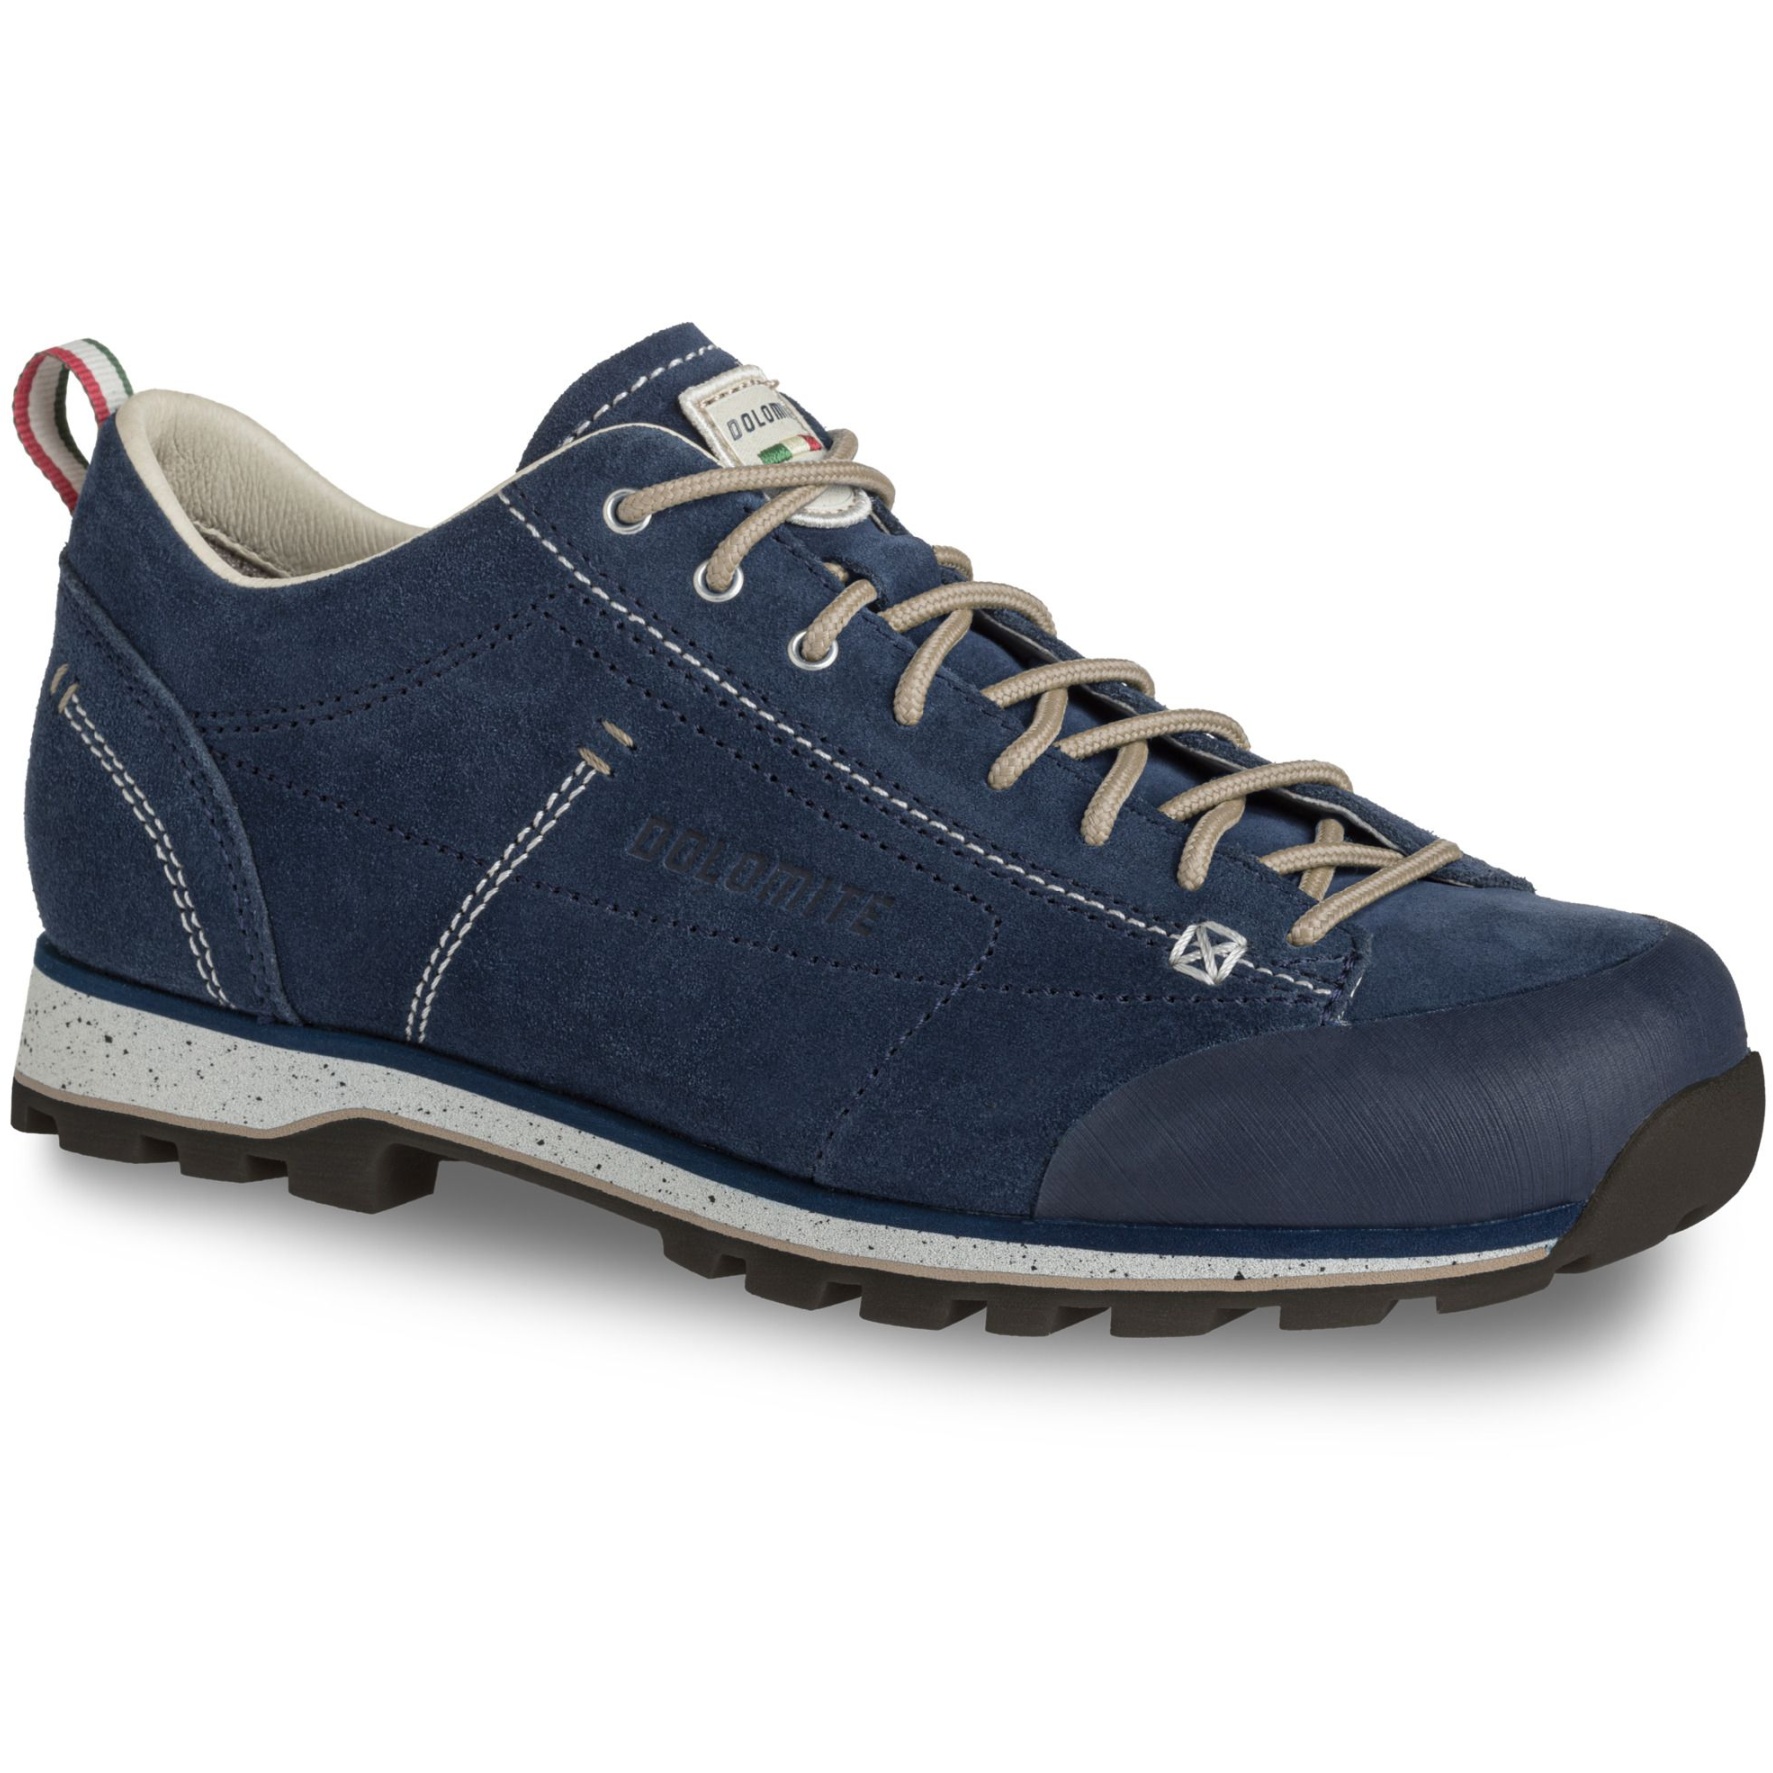 Picture of Dolomite 54 Low Evo Shoes Men - blue